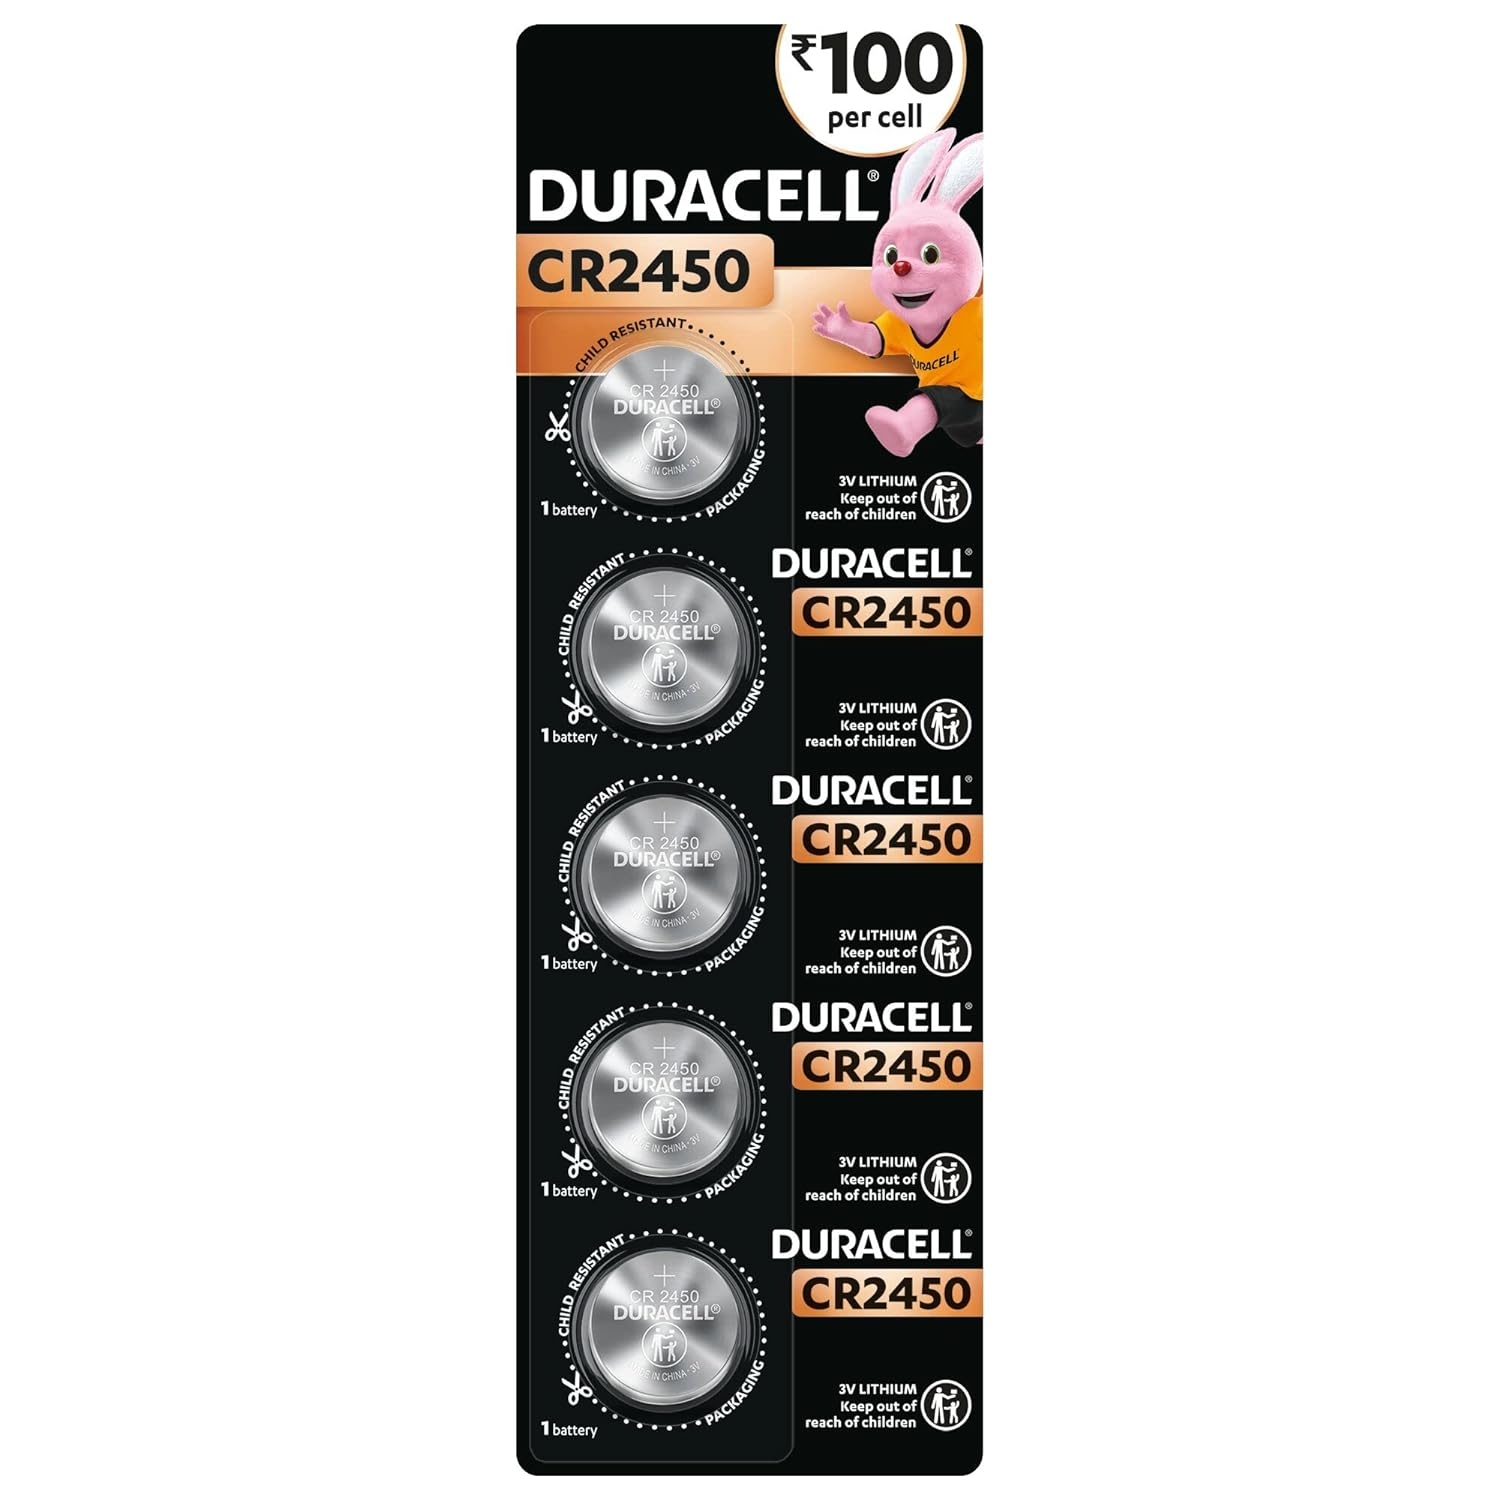 Duracell Specialty 2450 Lithium Coin Battery 3V (5 Pcs) for Keyfobs, Scales, Wearables & Medical Devices - DL2450/CR2450